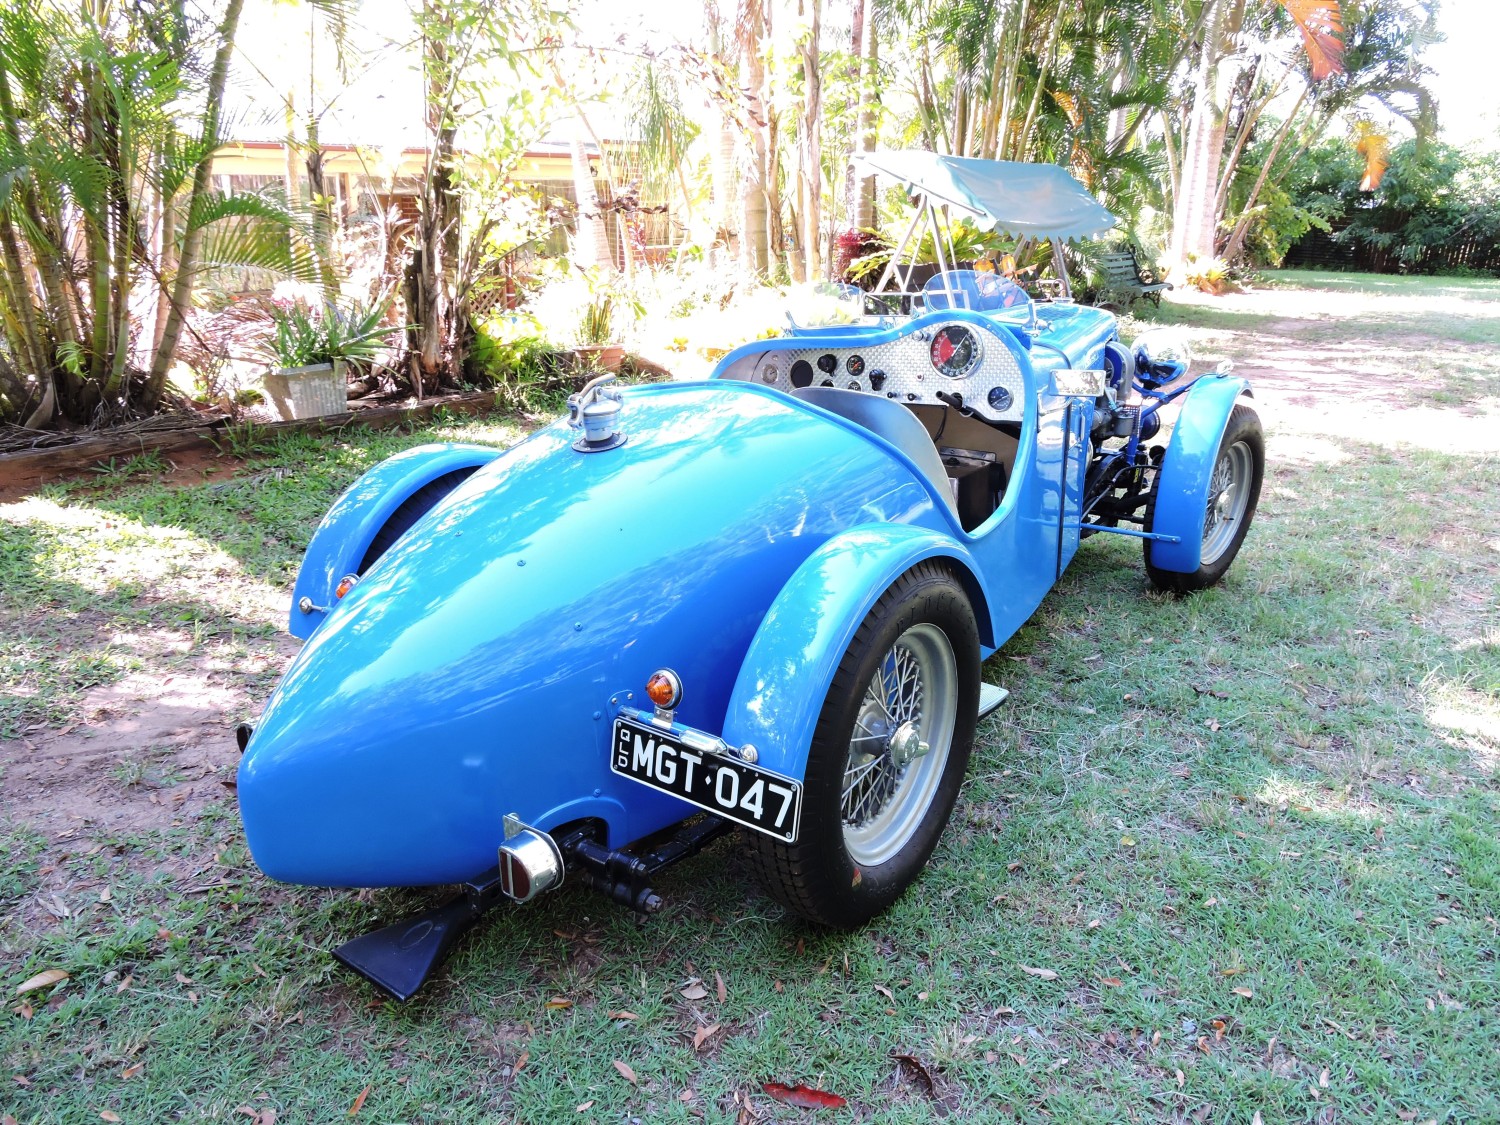 1947 MG TC/Q type special - Healeypete - Shannons Club